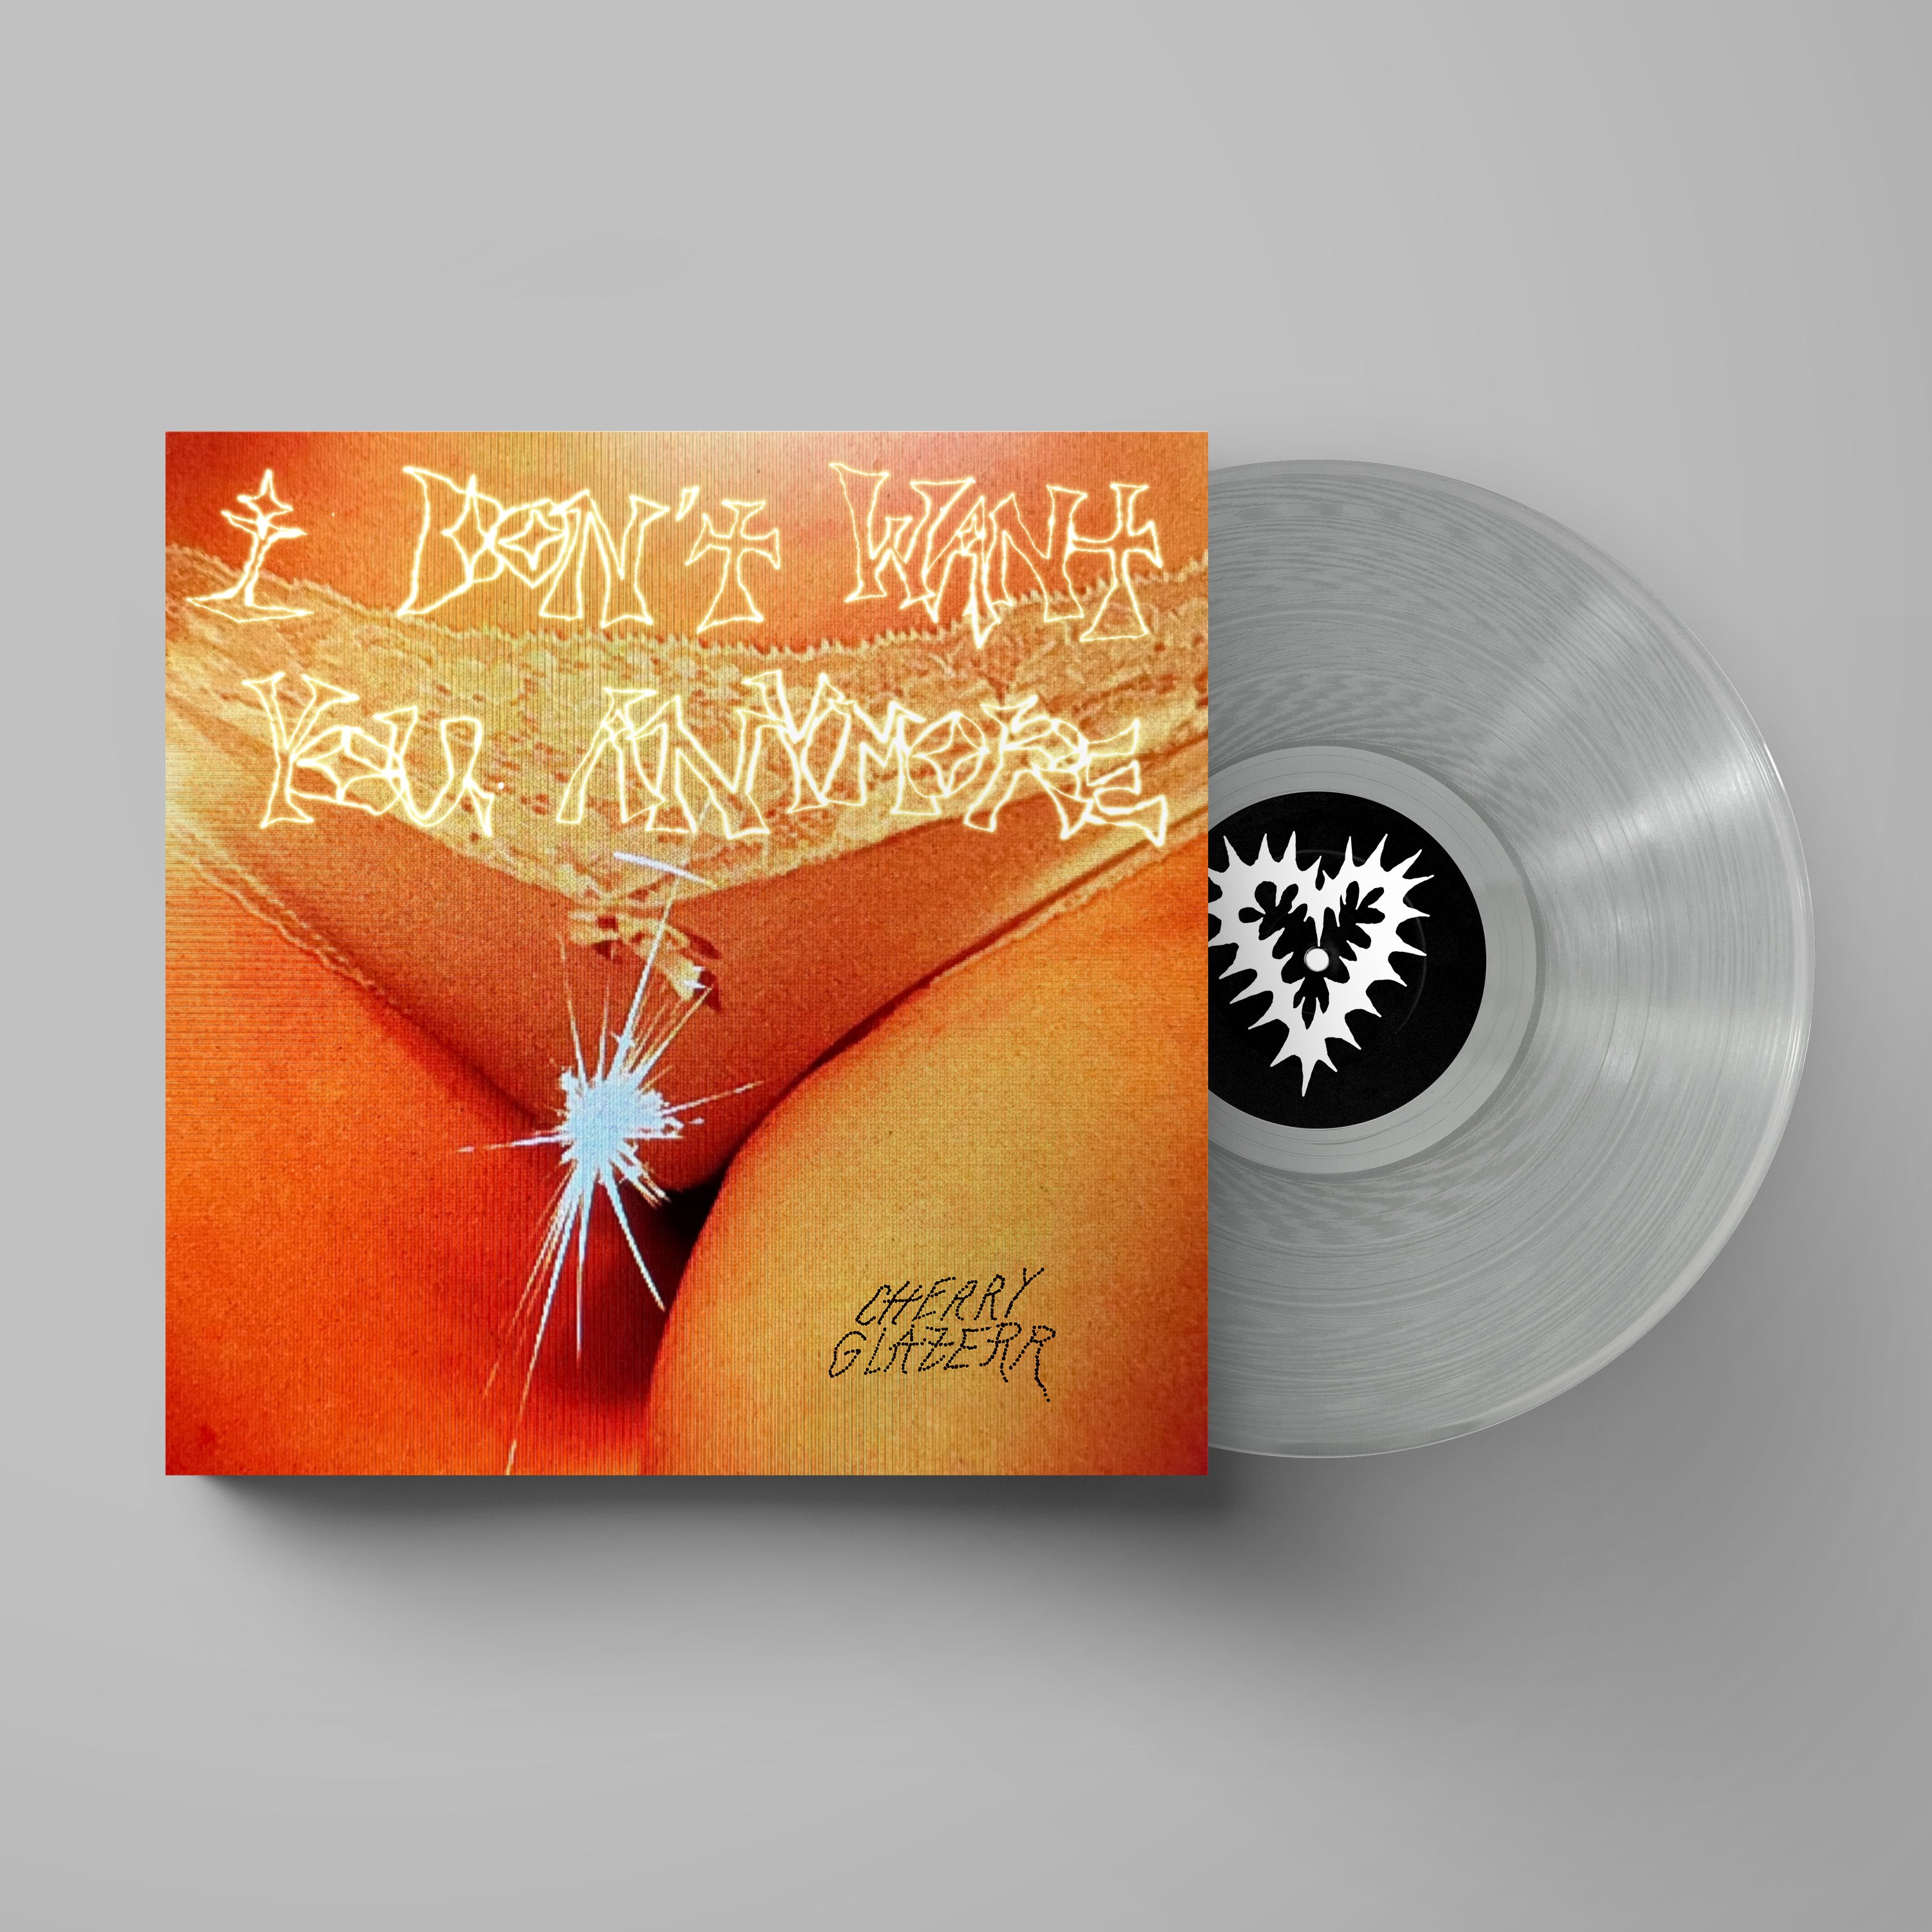 Cherry Glazerr - I Don't Want You Anymore: Limited Crystal Clear Vinyl LP